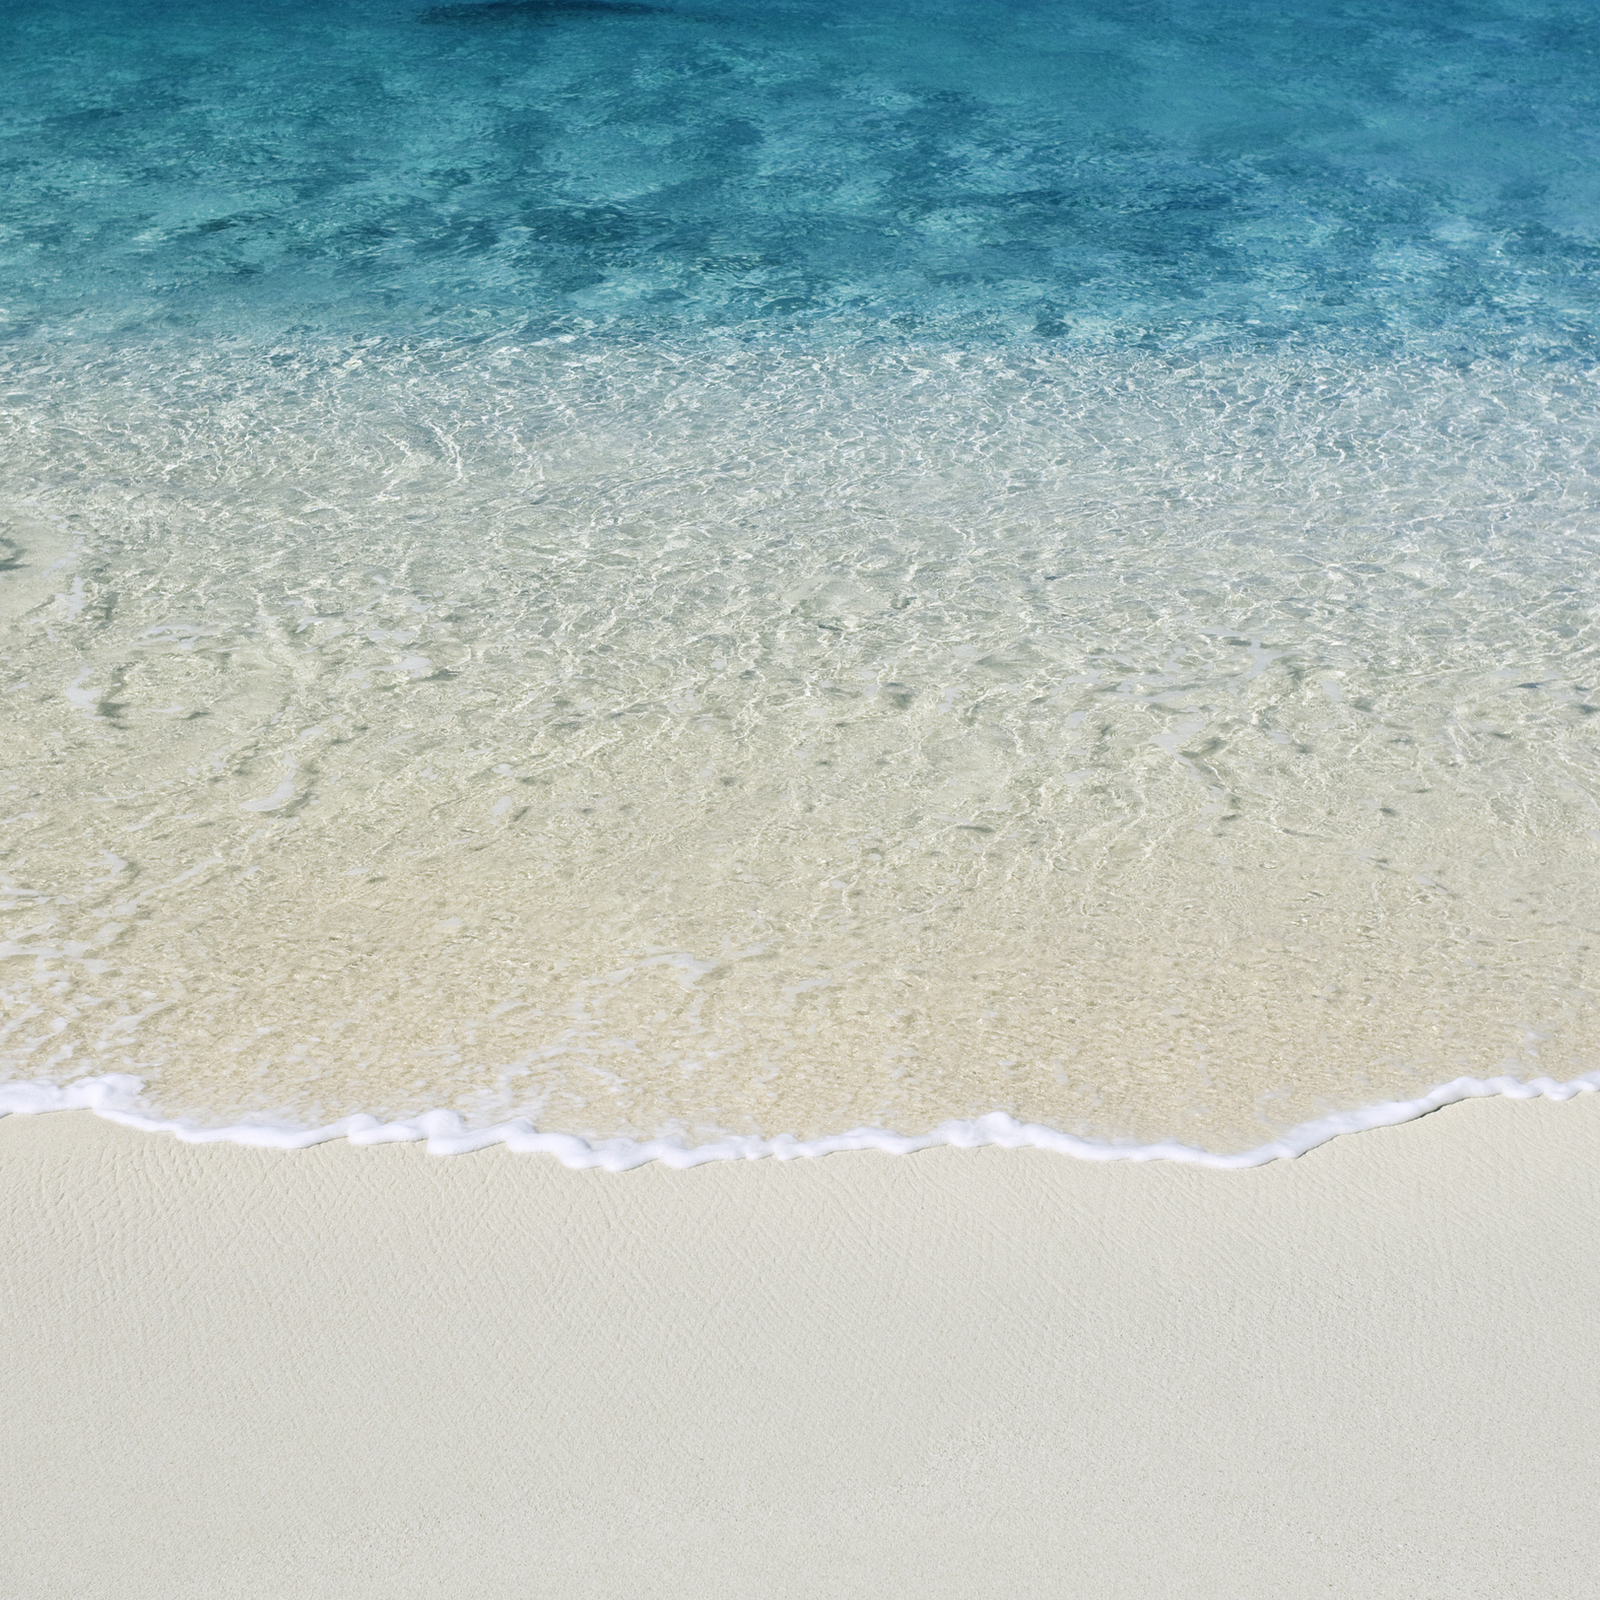 ios beach wallpaper,blue,water,sand,wave,turquoise